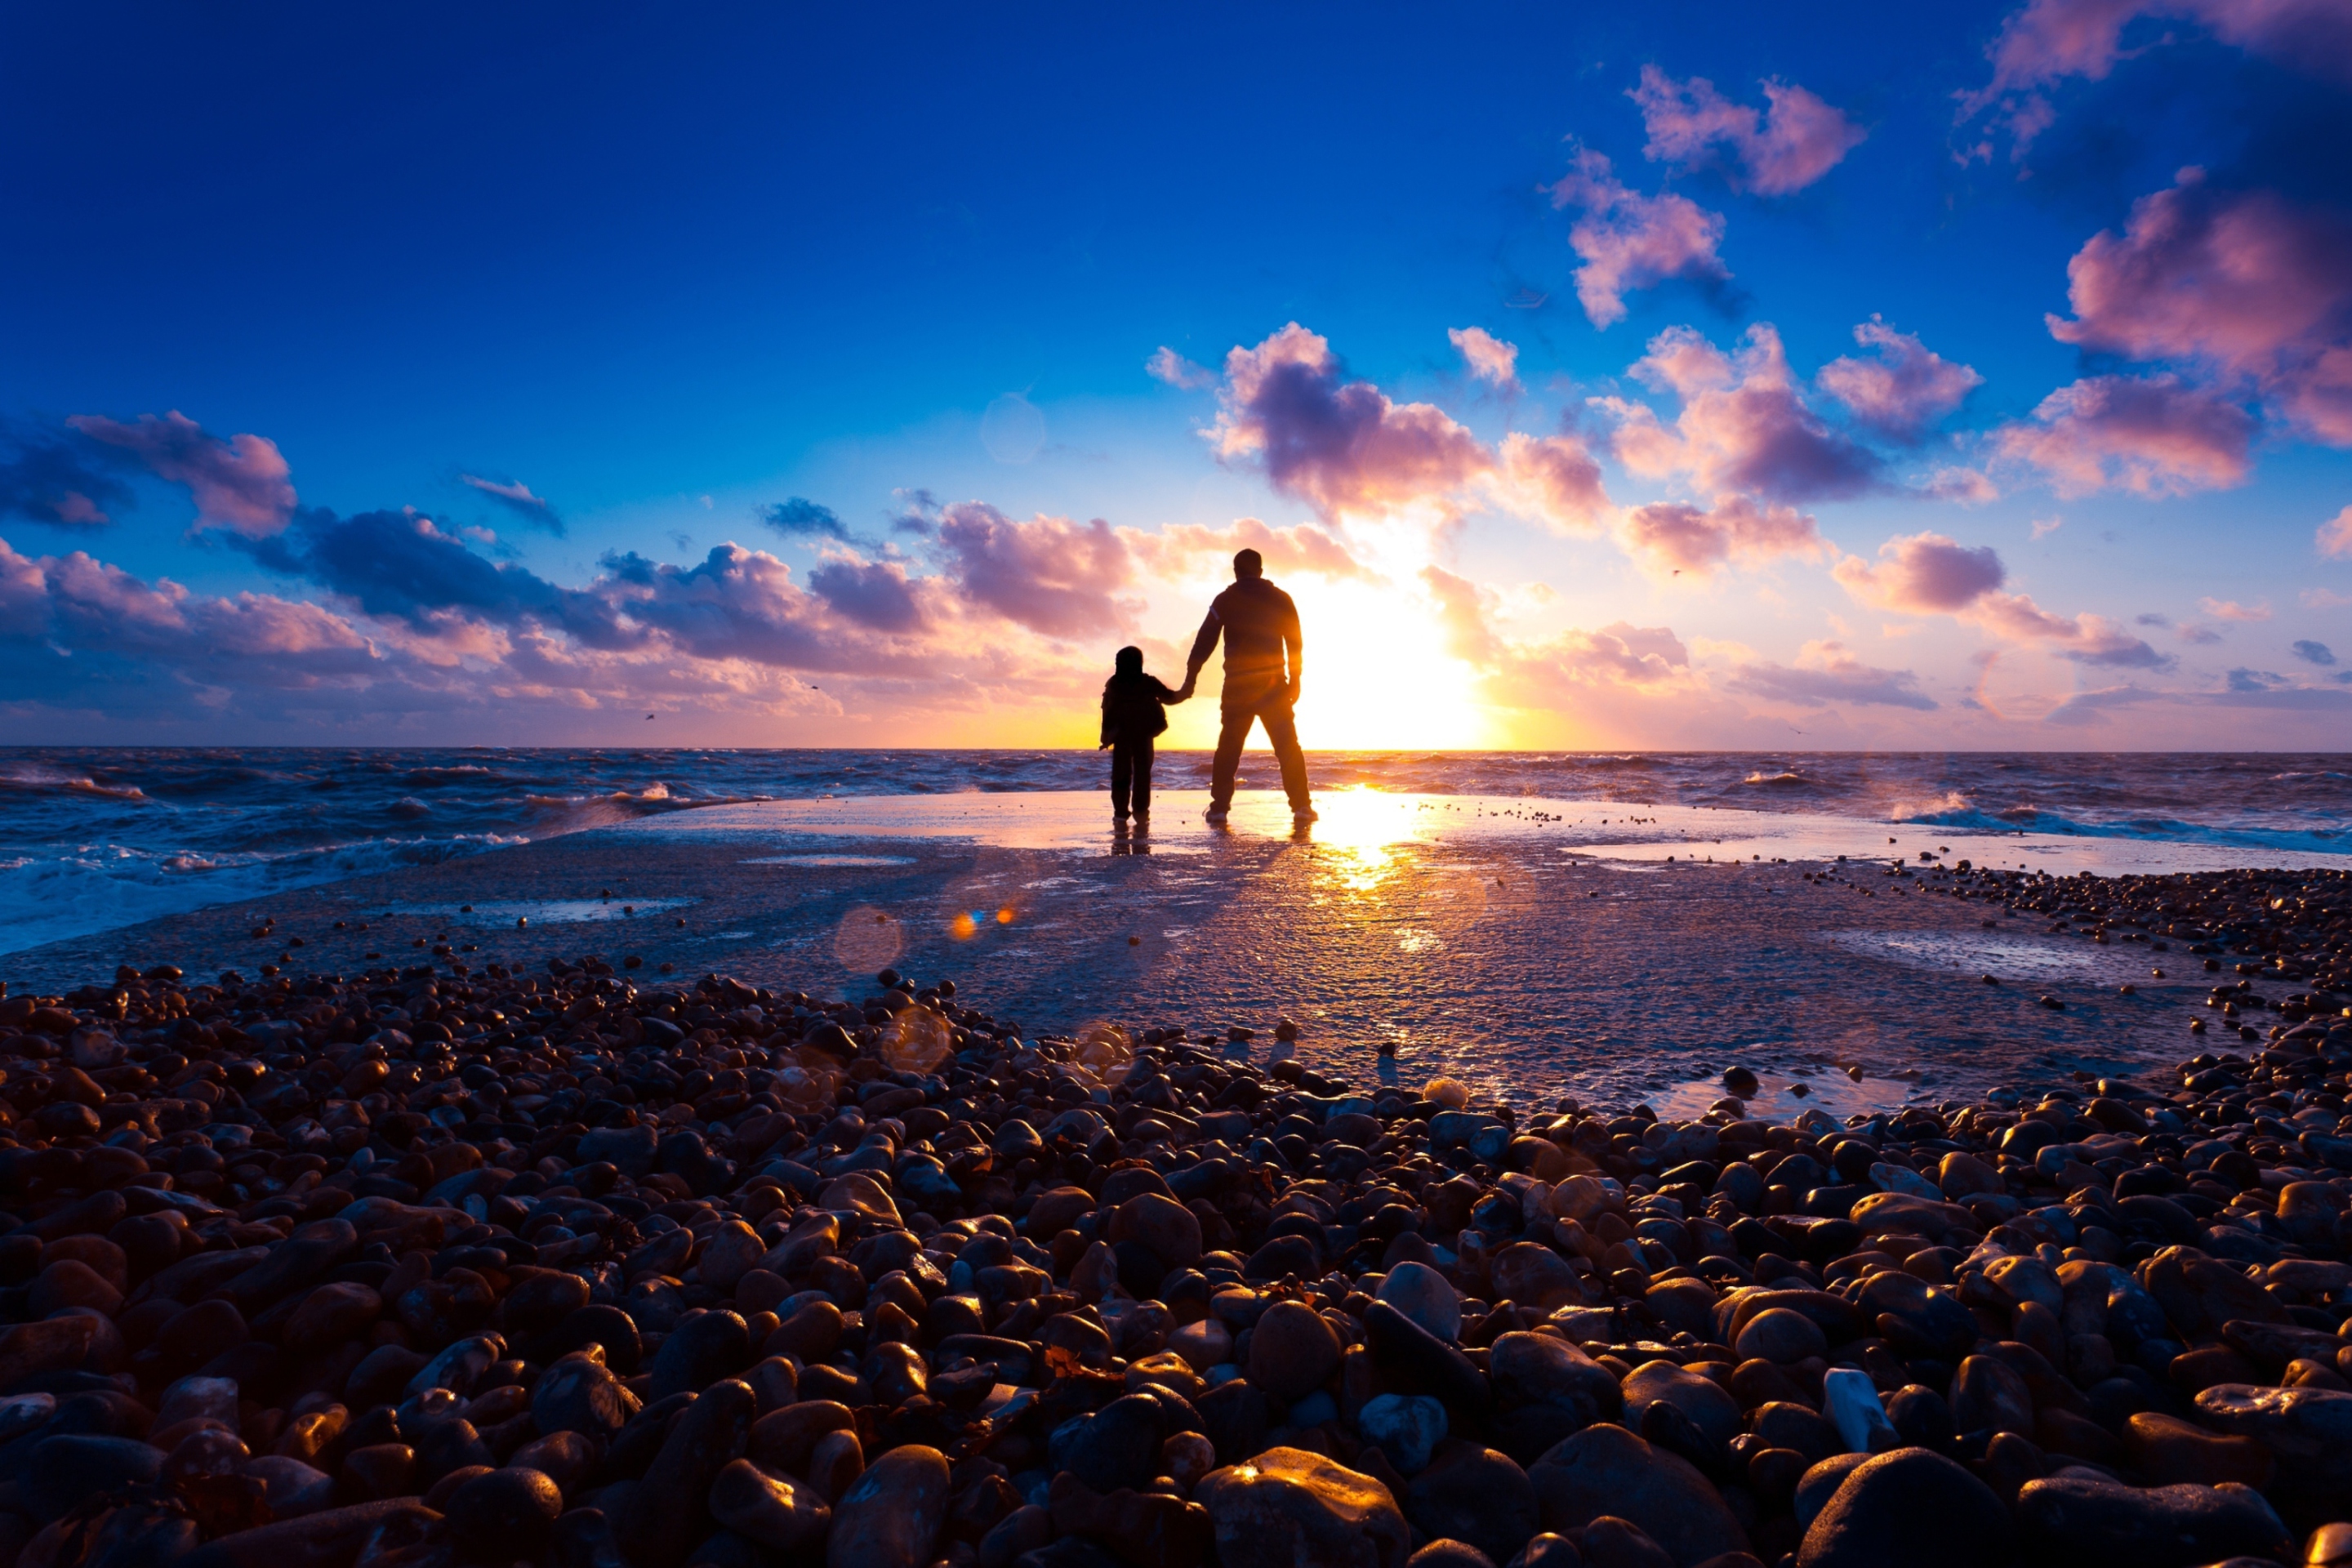 Father And Son On Beach At Sunset wallpaper 2880x1920